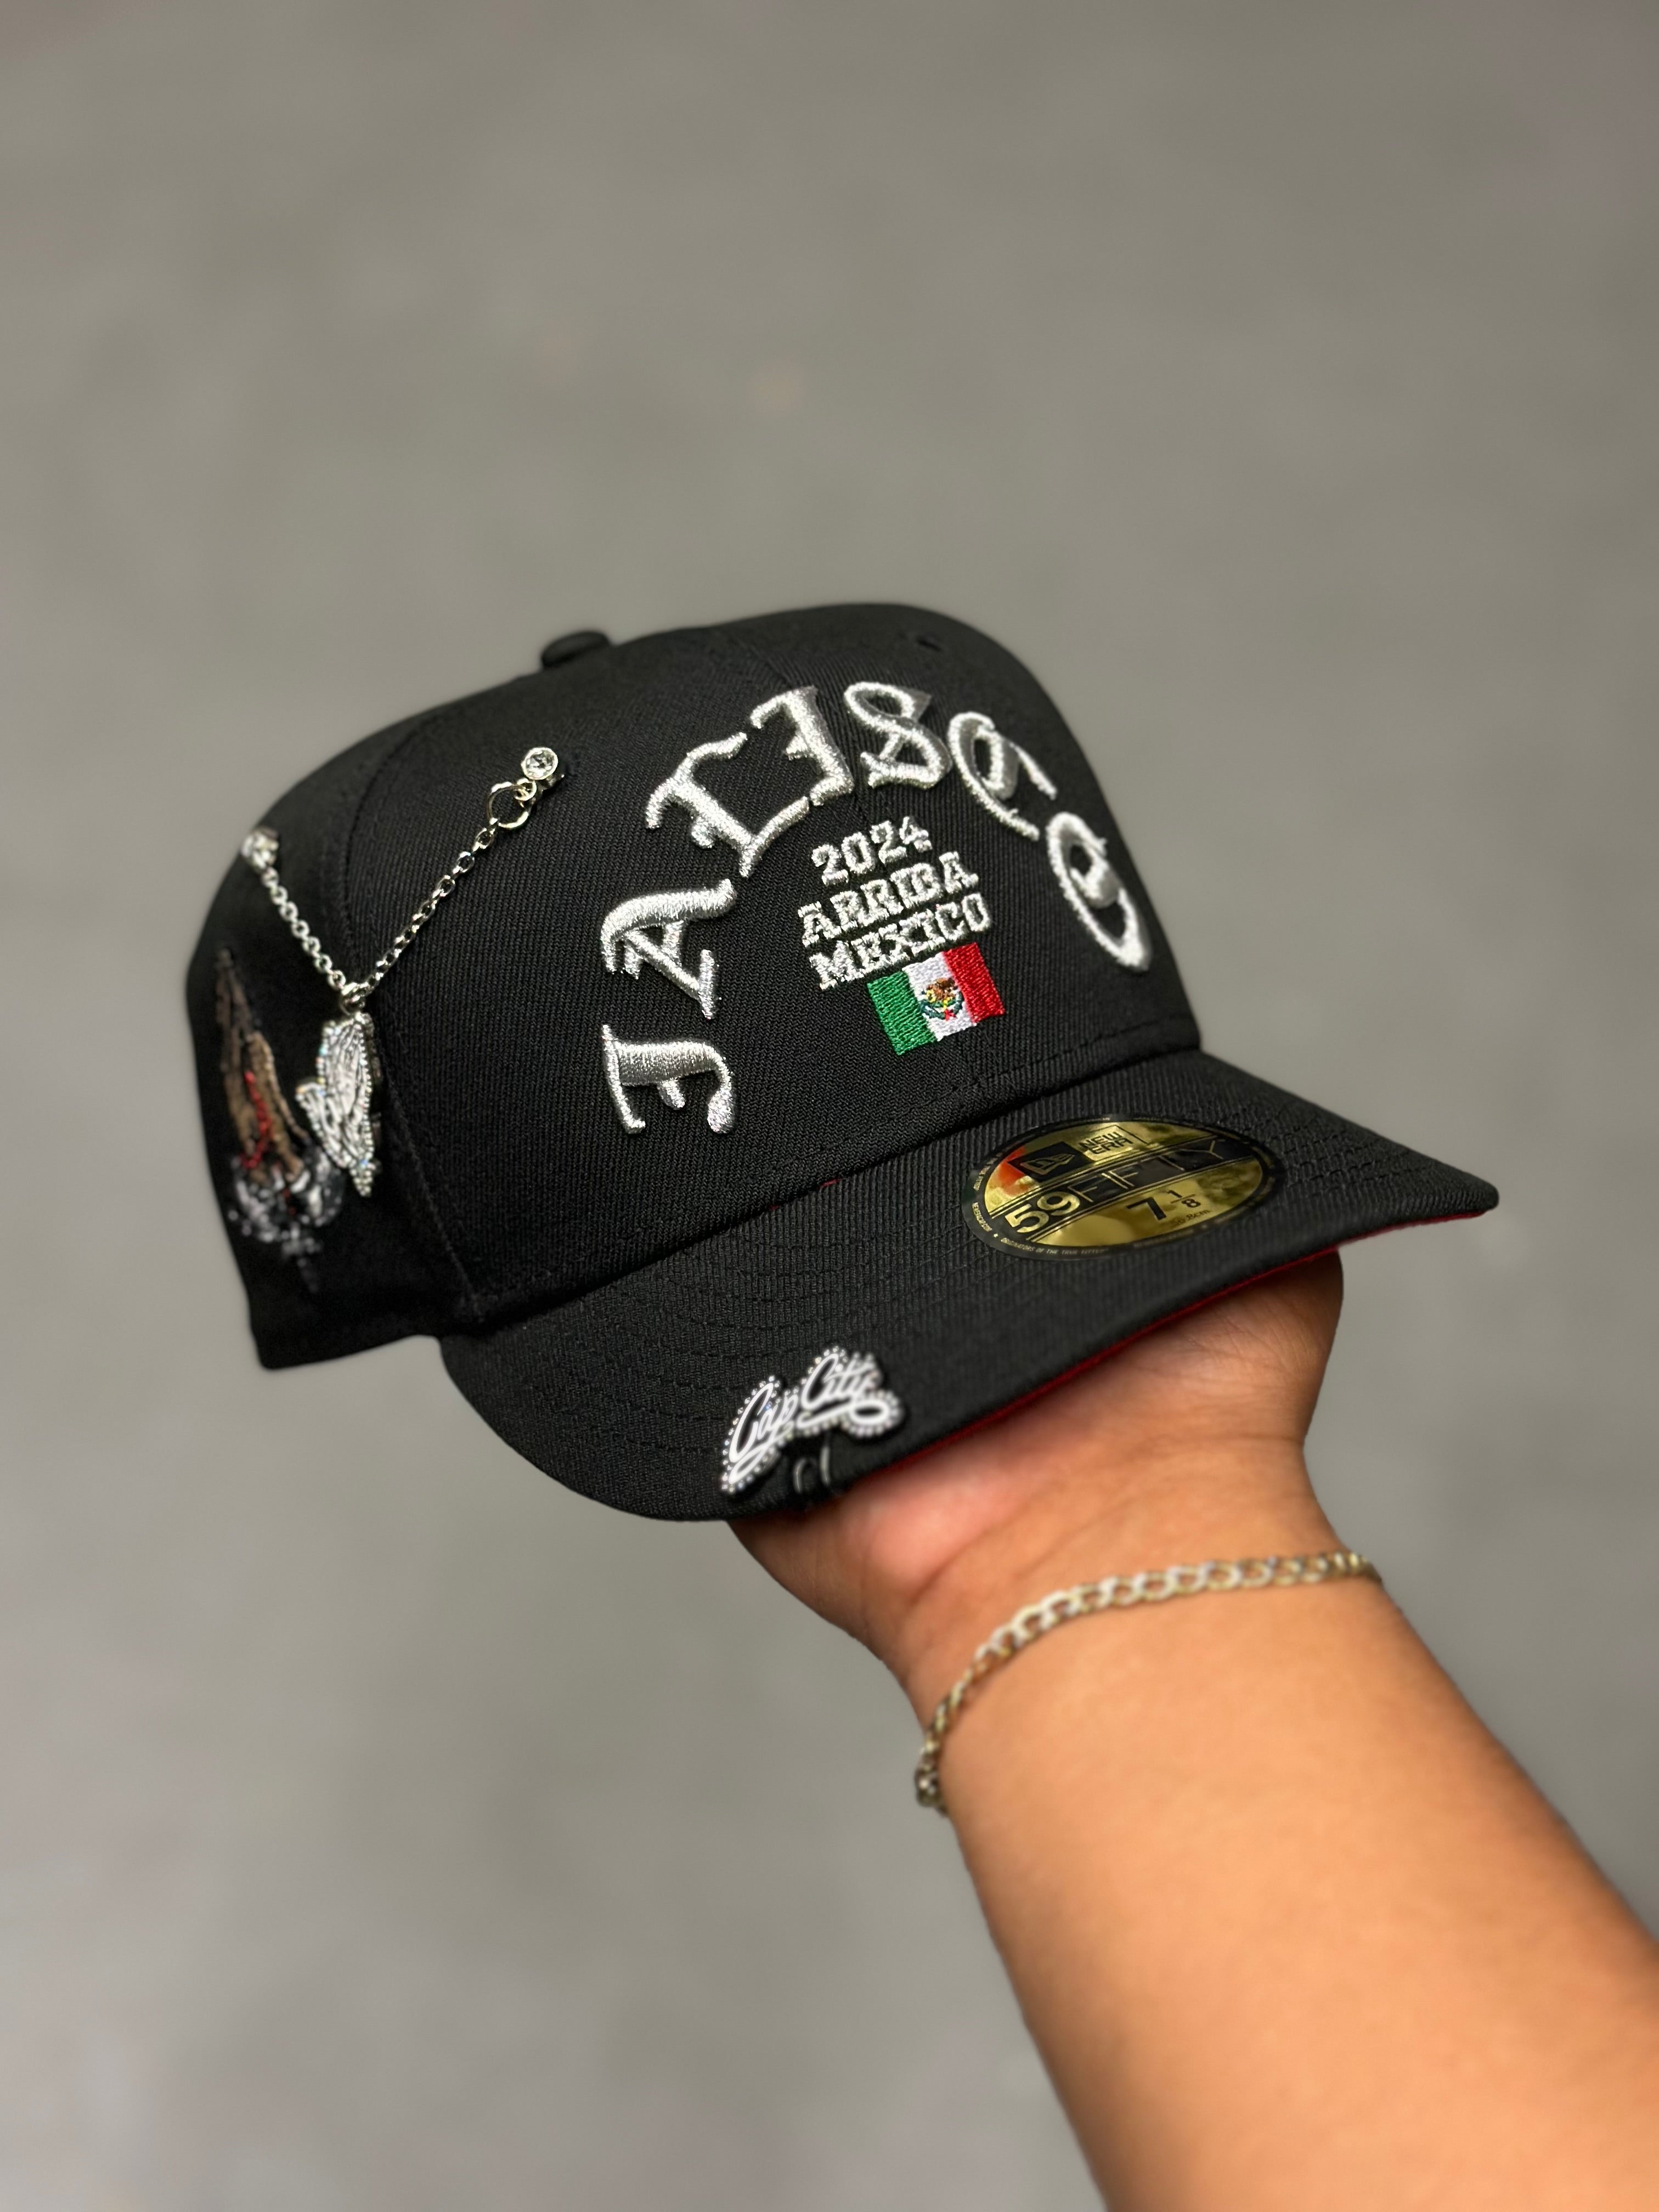 NEW ERA EXCLUSIVE 59FIFTY BLACK JALISCO "ARRIBA MEXICO" W/ PRAYING HANDS SIDE PATCH